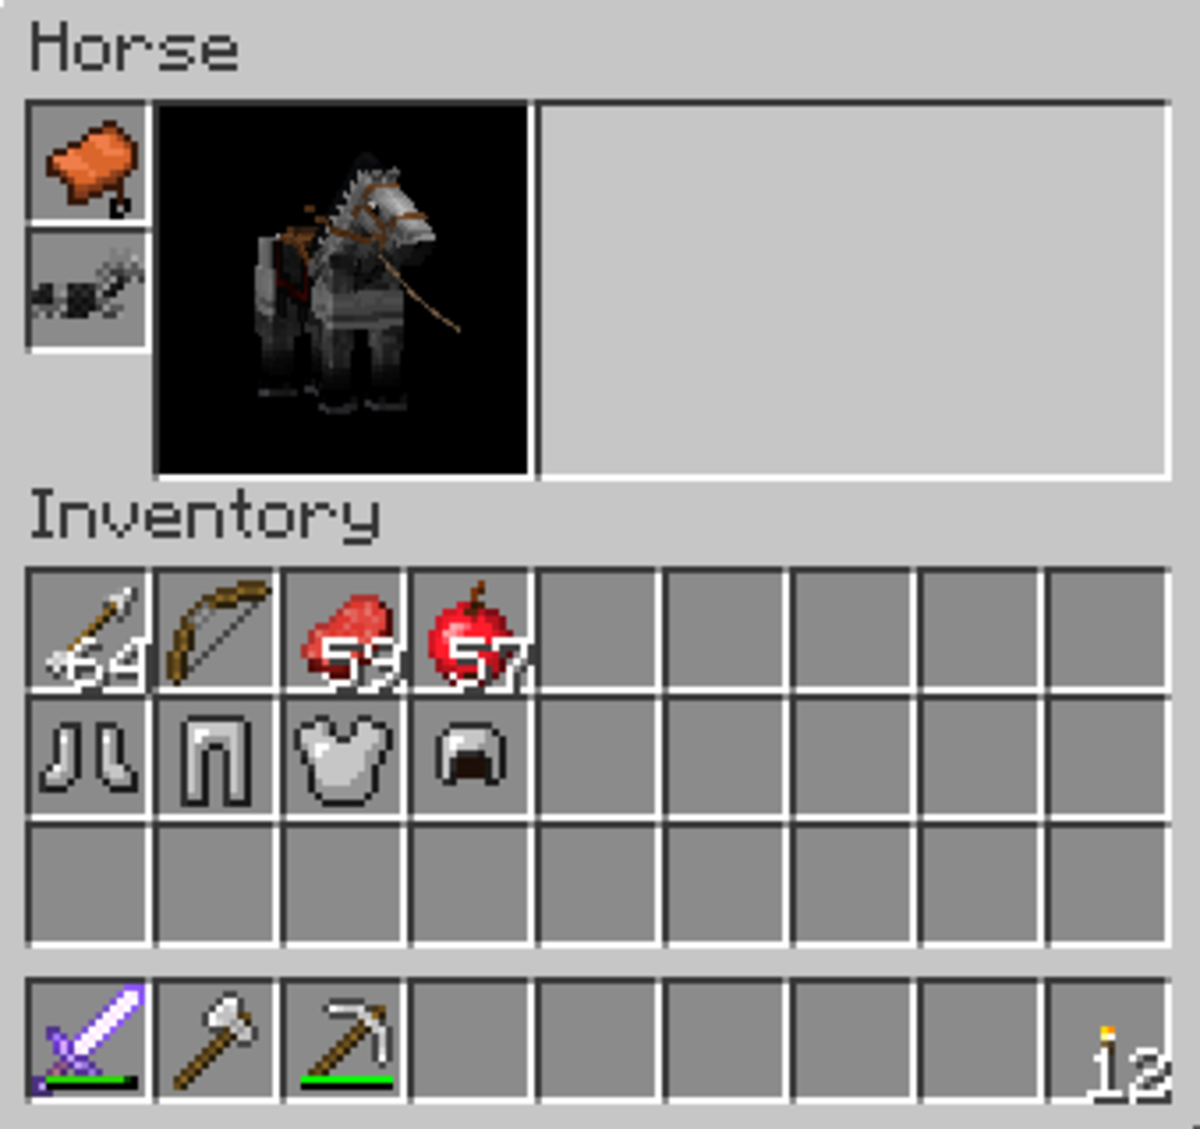 Horses can be equipped with horse armor.